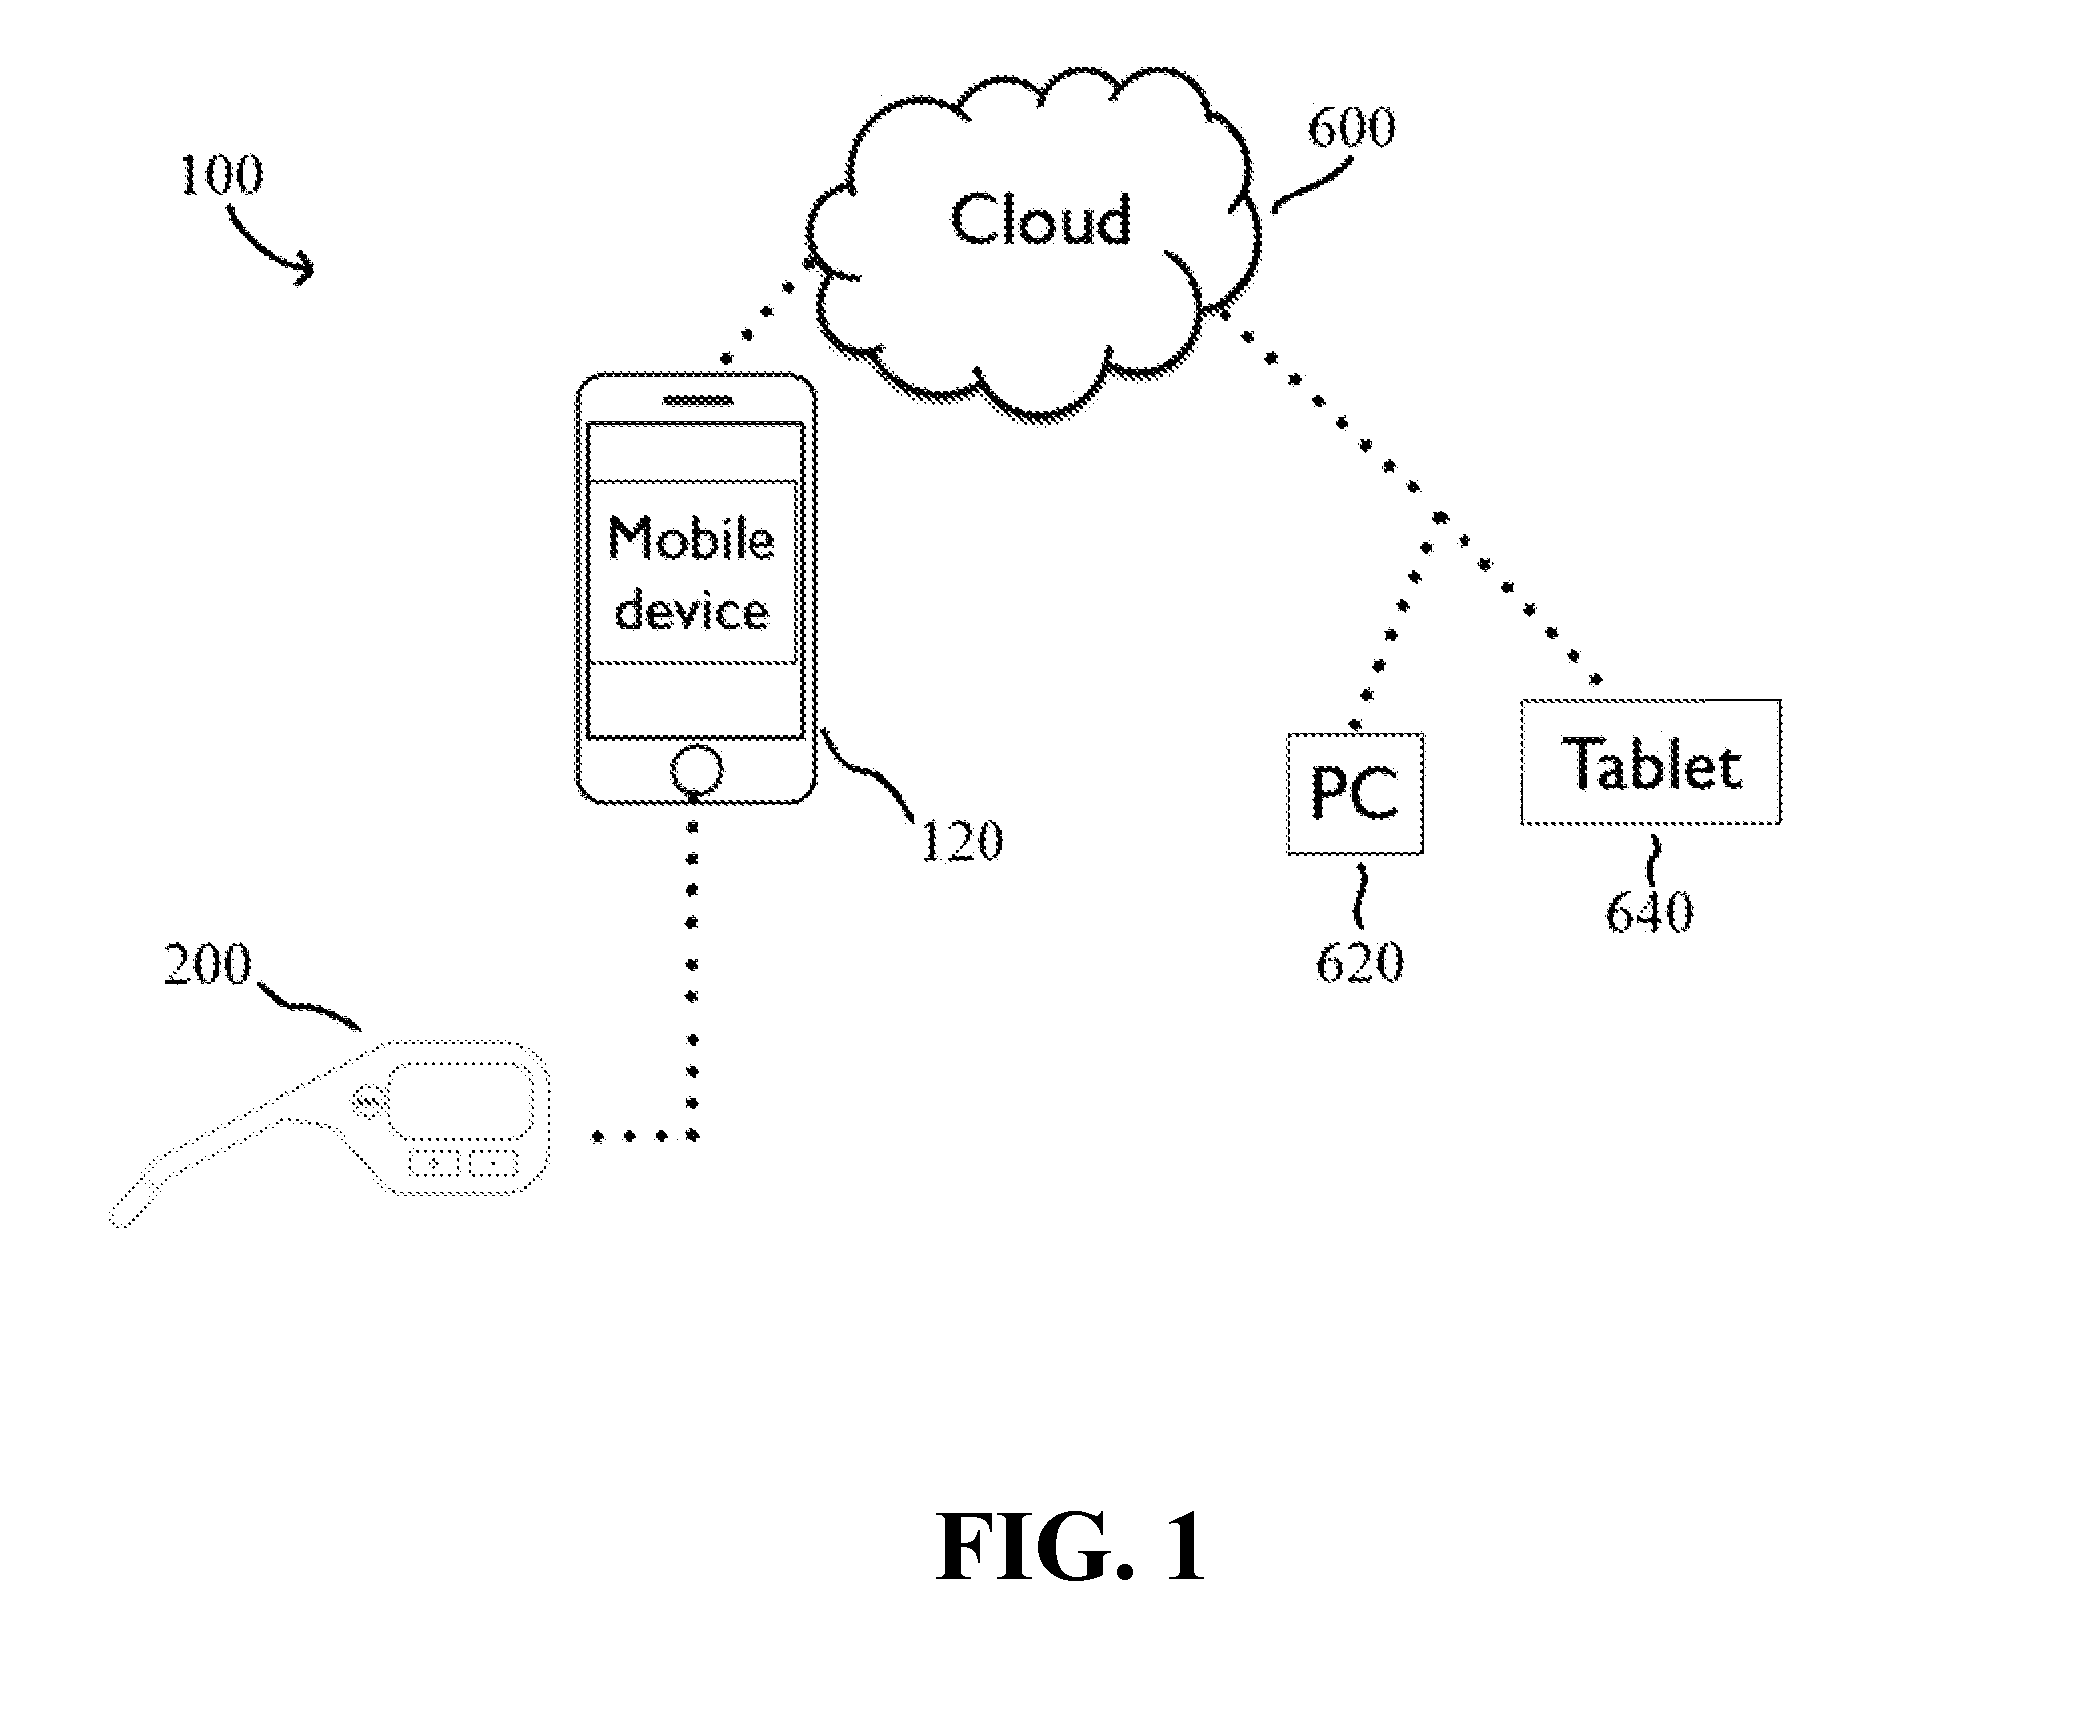 Systems and methods for monitoring fertility using a portable electronic device